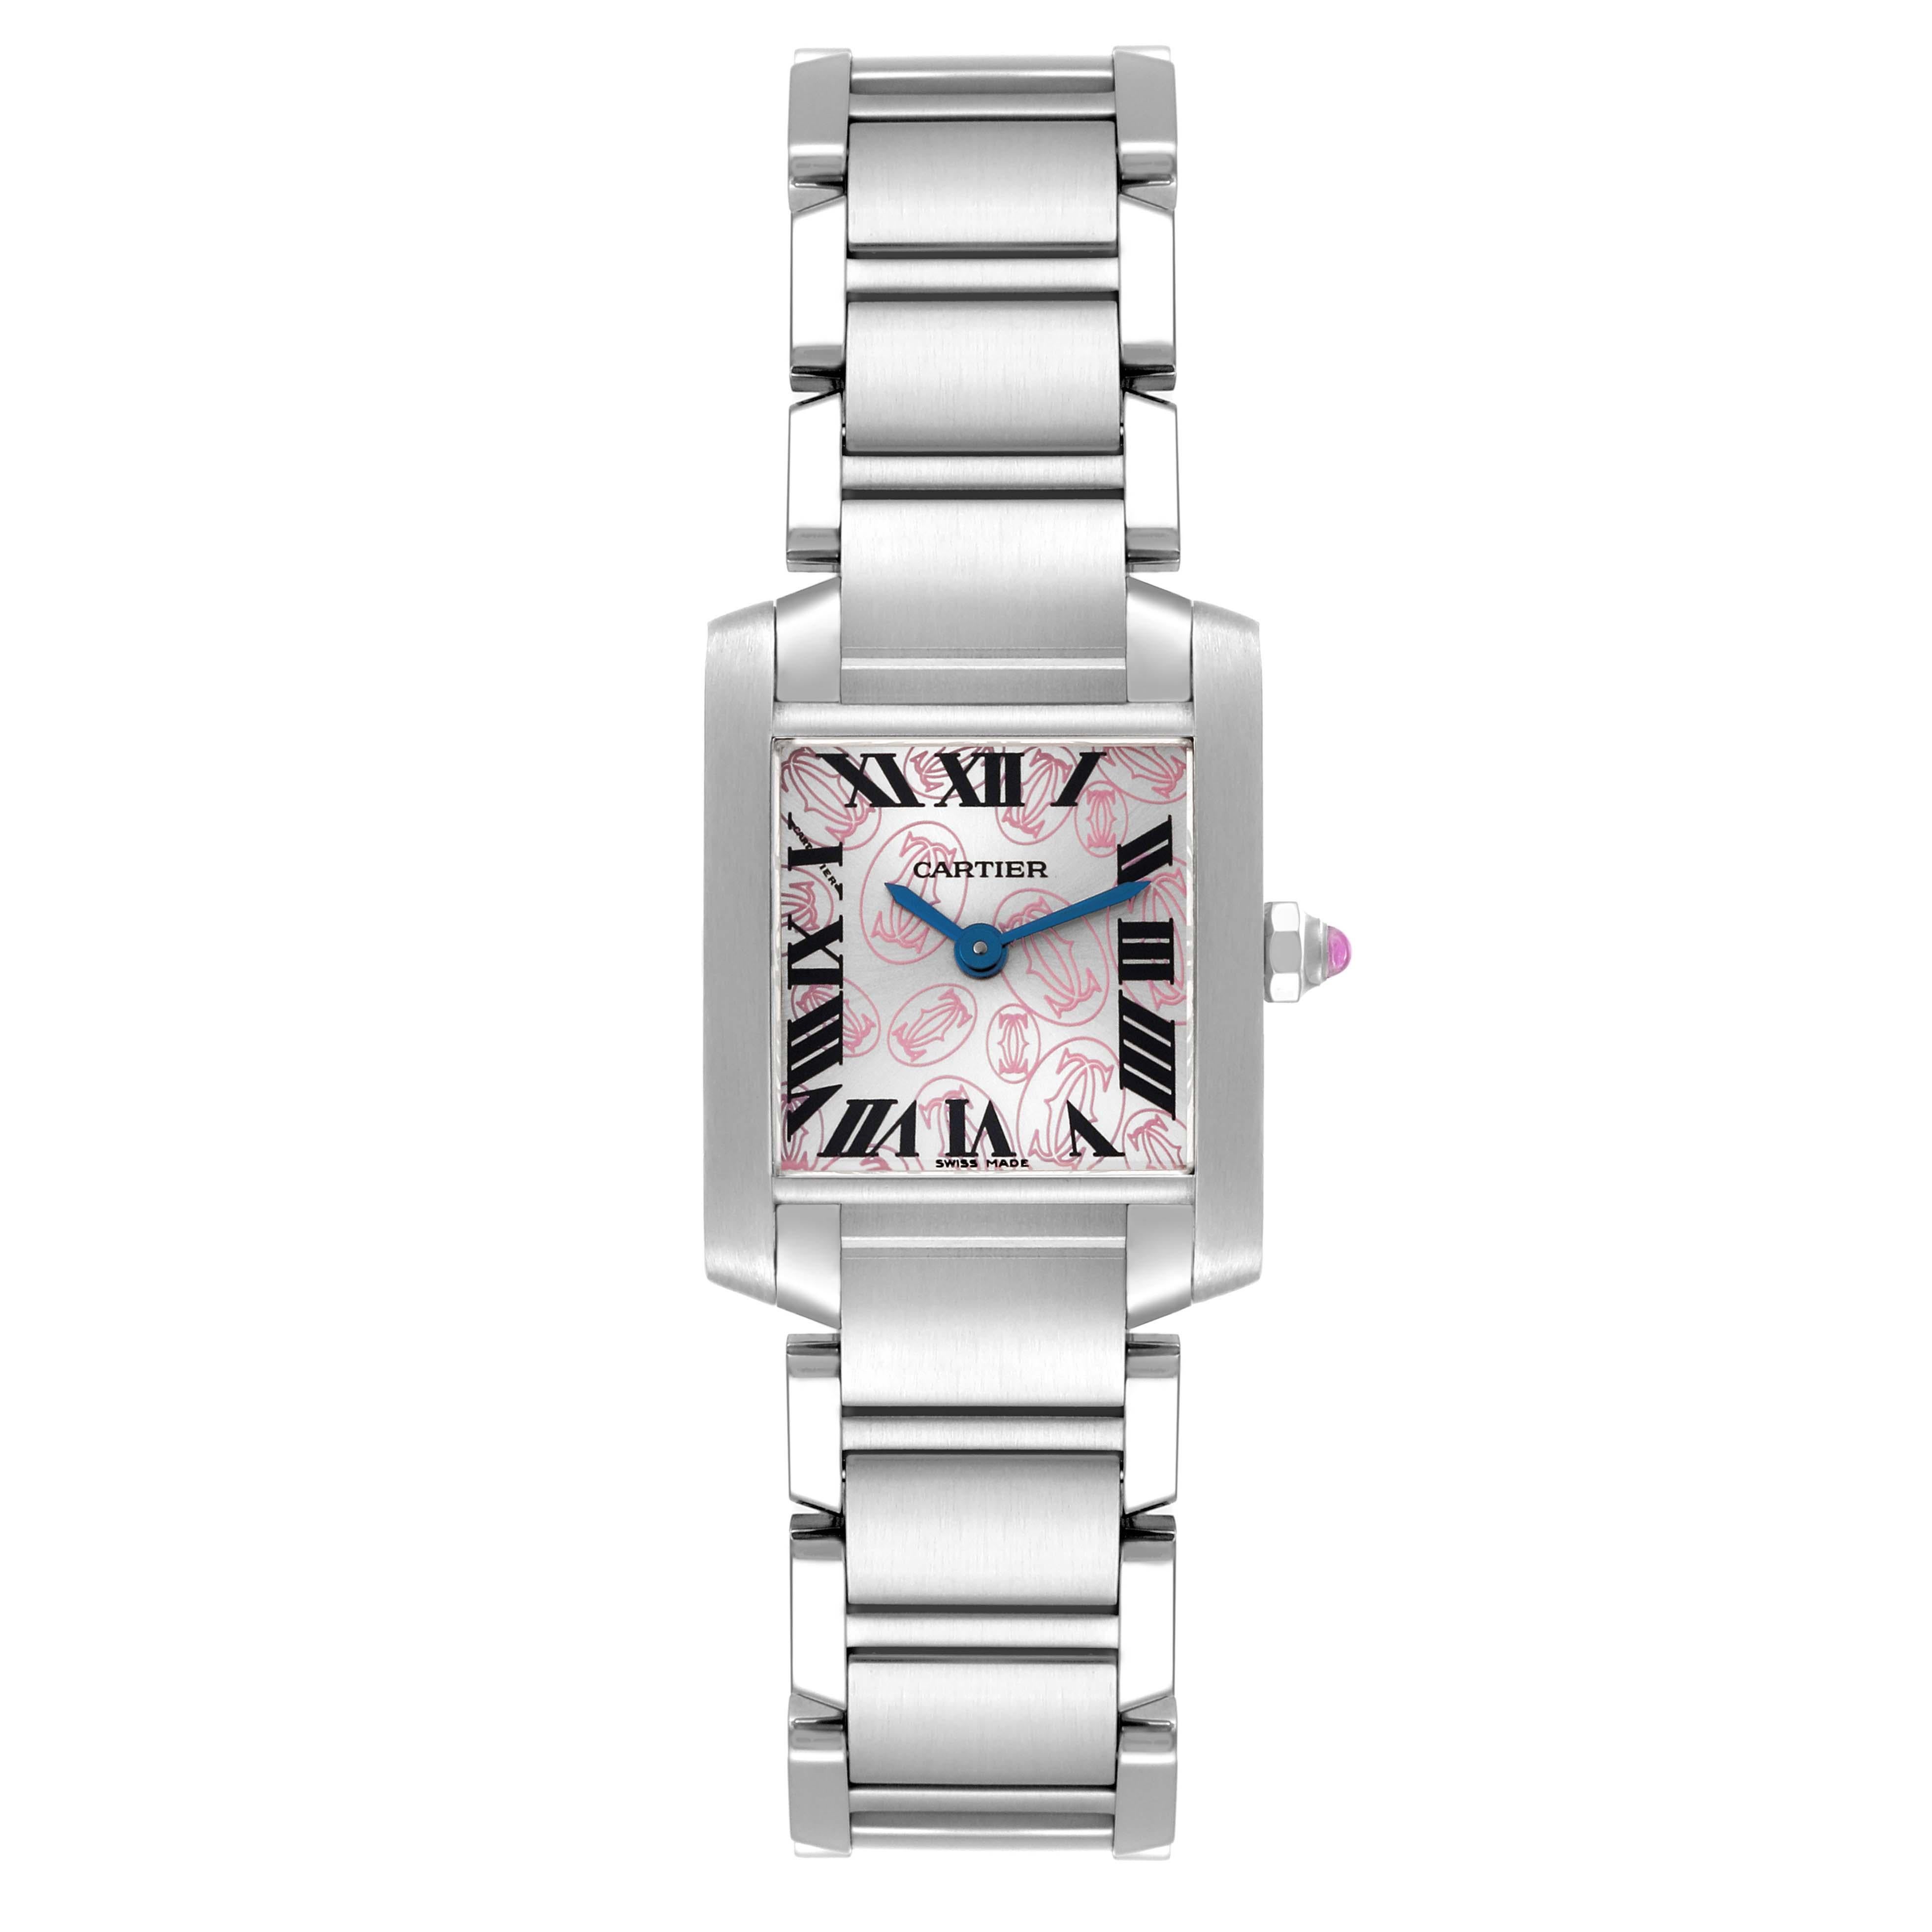 Cartier Tank Francaise Pink Double C Decor Limited Edition Steel Ladies Watch W51031Q3. Quartz movement. Rectangular stainless steel 20 x 25 mm case. Octagonal crown set with a pink spinel cabochon. . Scratch resistant sapphire crystal. Silver dial